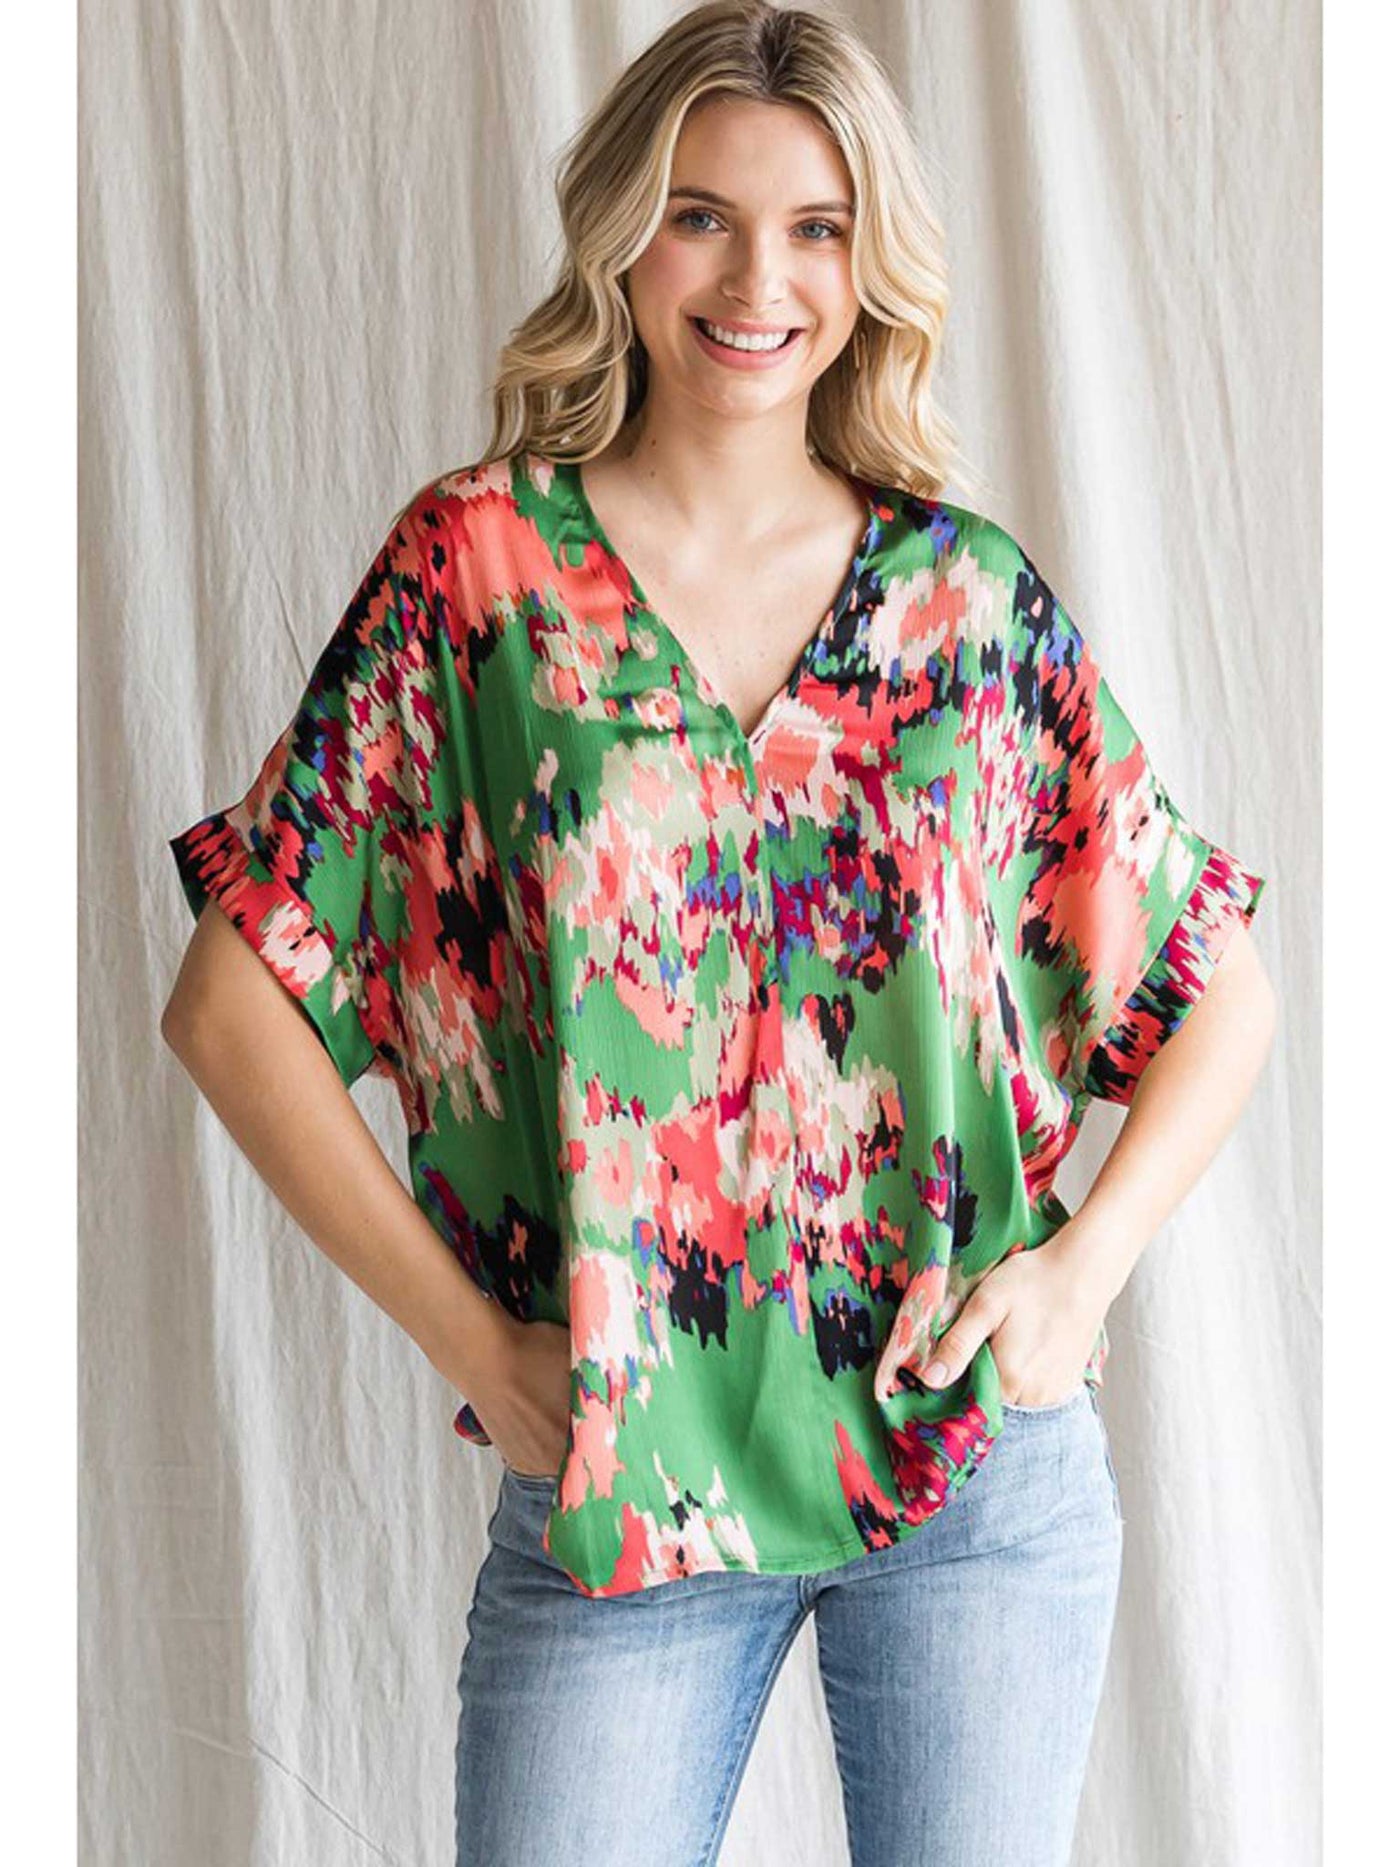 Curvy Live Colorfully Print Top